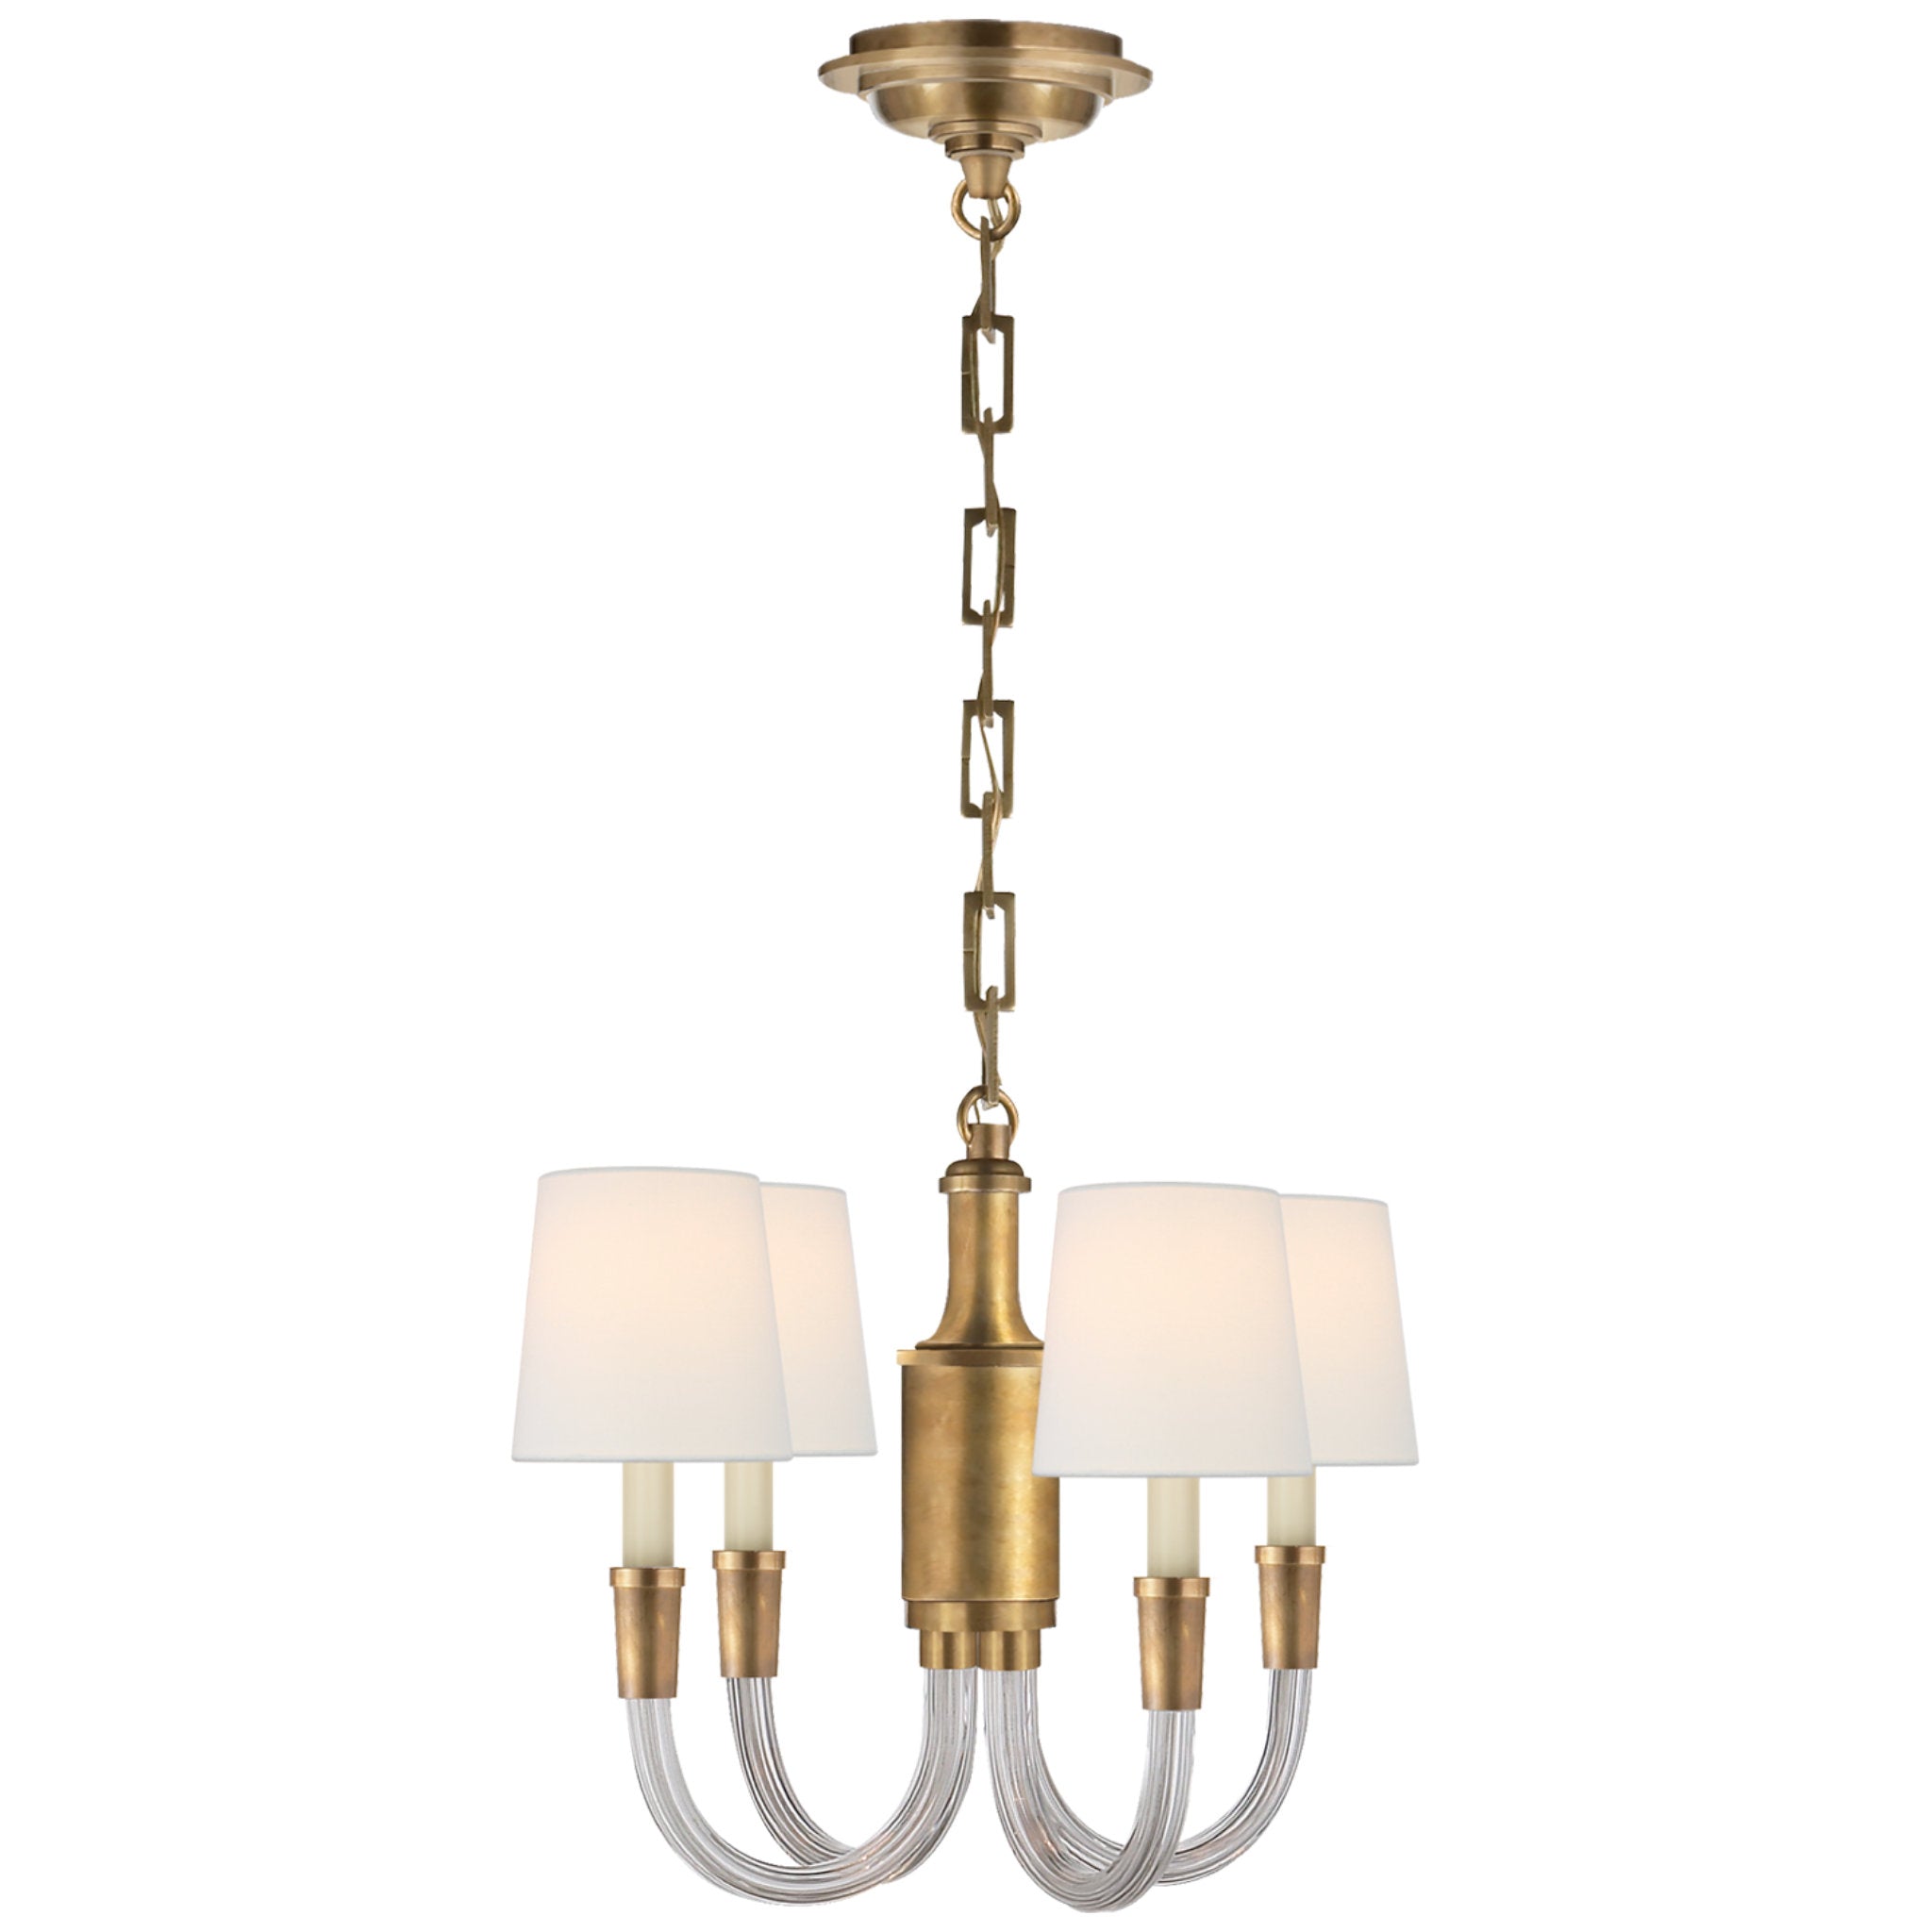 Thomas O'Brien Vivian Mini Chandelier in Hand-Rubbed Antique Brass with Linen Shades